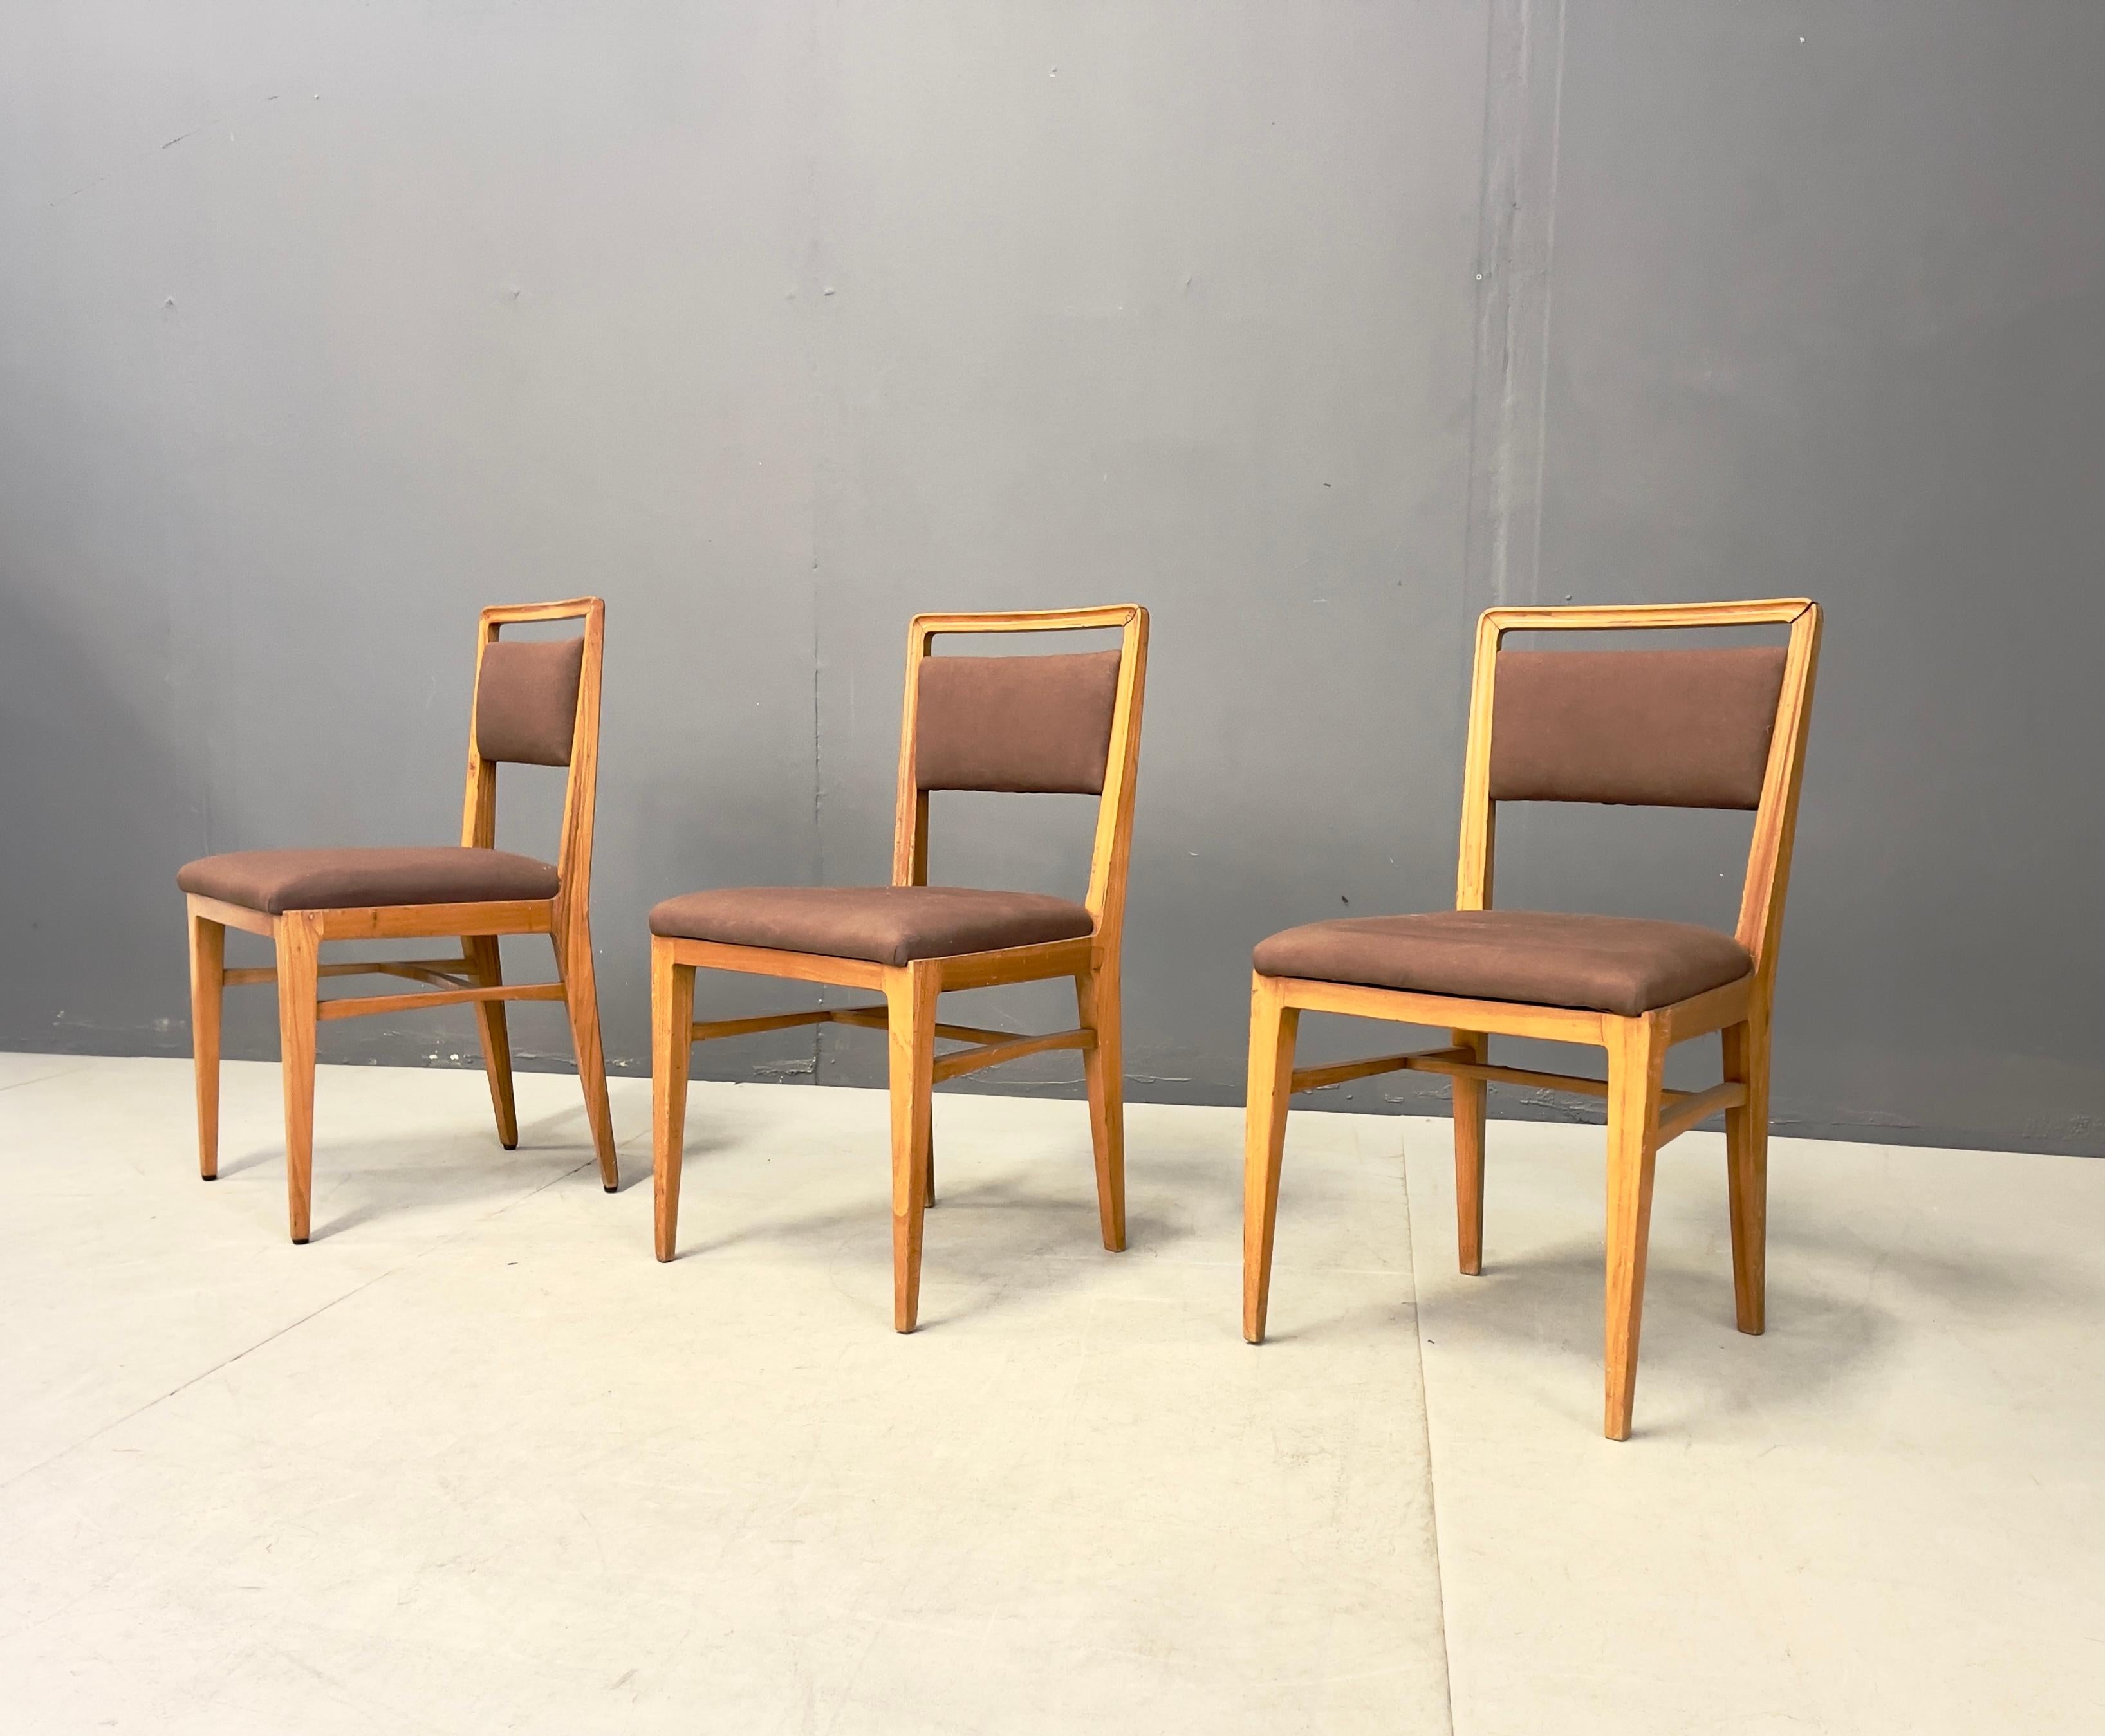 Three wooden chairs with fabric upholstery. Attributed to Gio Ponti. 1950s.
Beautiful living room chairs in good condition.